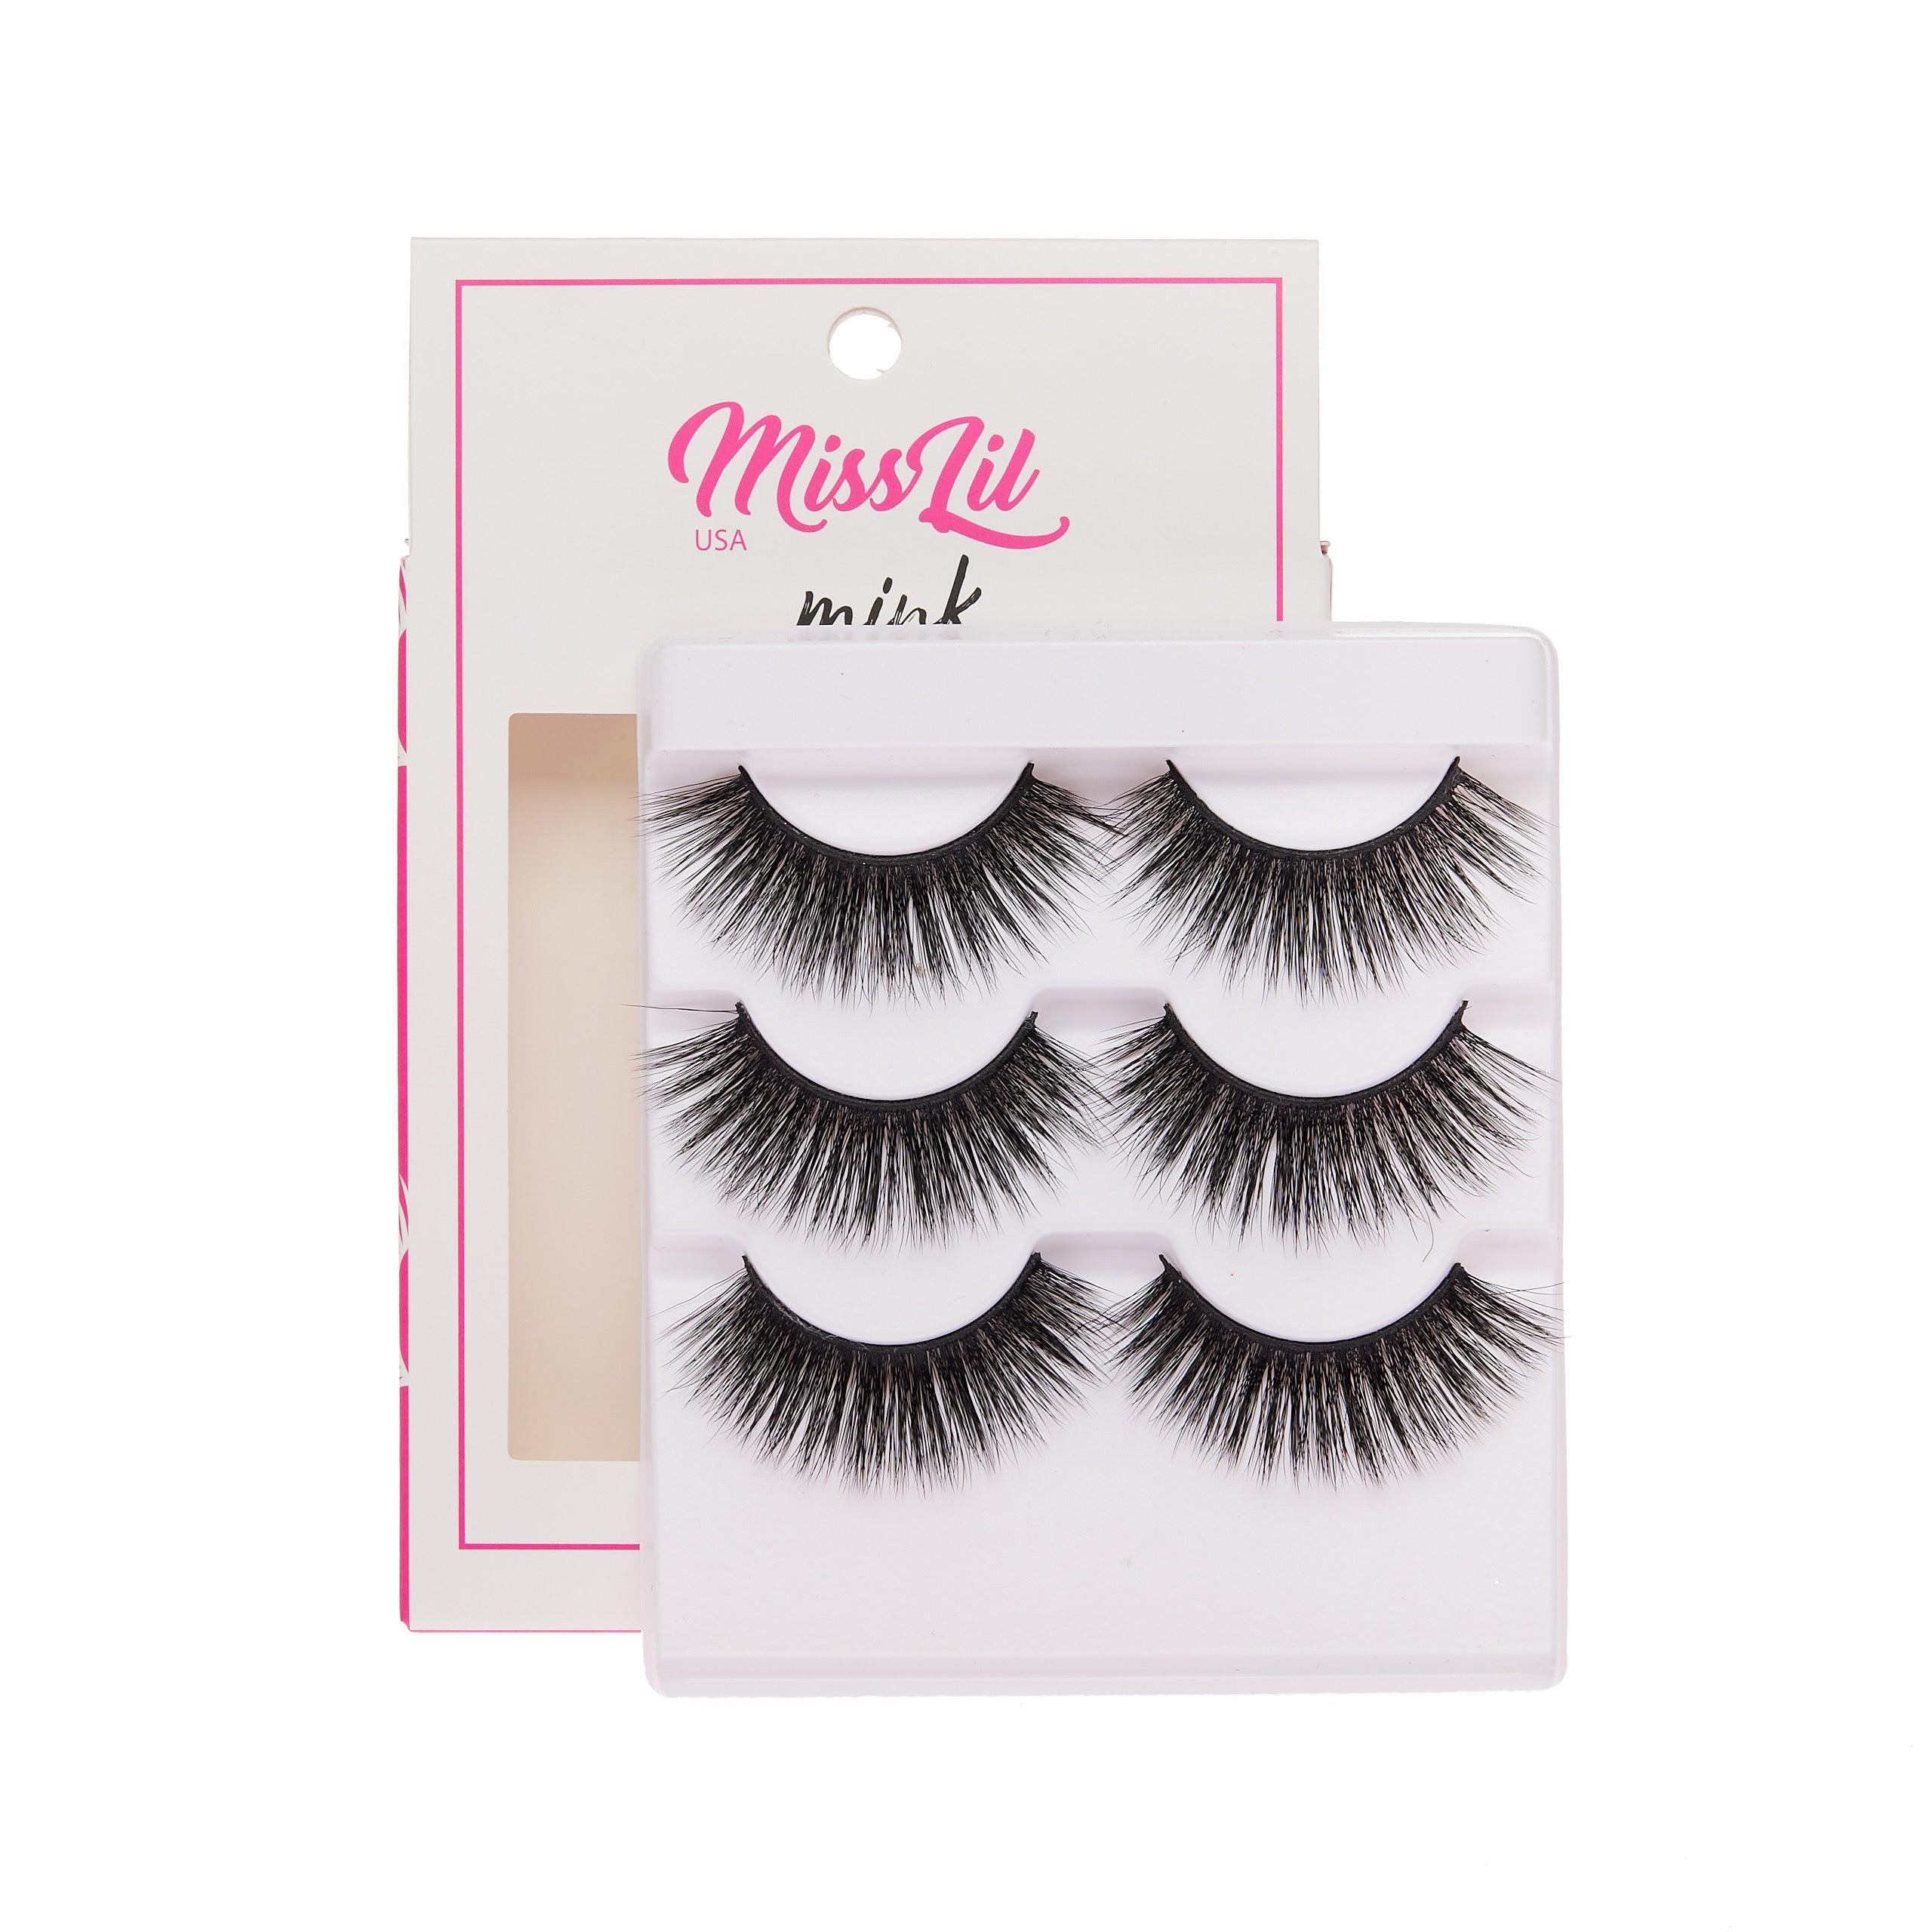 3-Pair Faux Mink Effect Eyelashes - Lash Party Collection #7 - Pack of 3 - Miss Lil USA